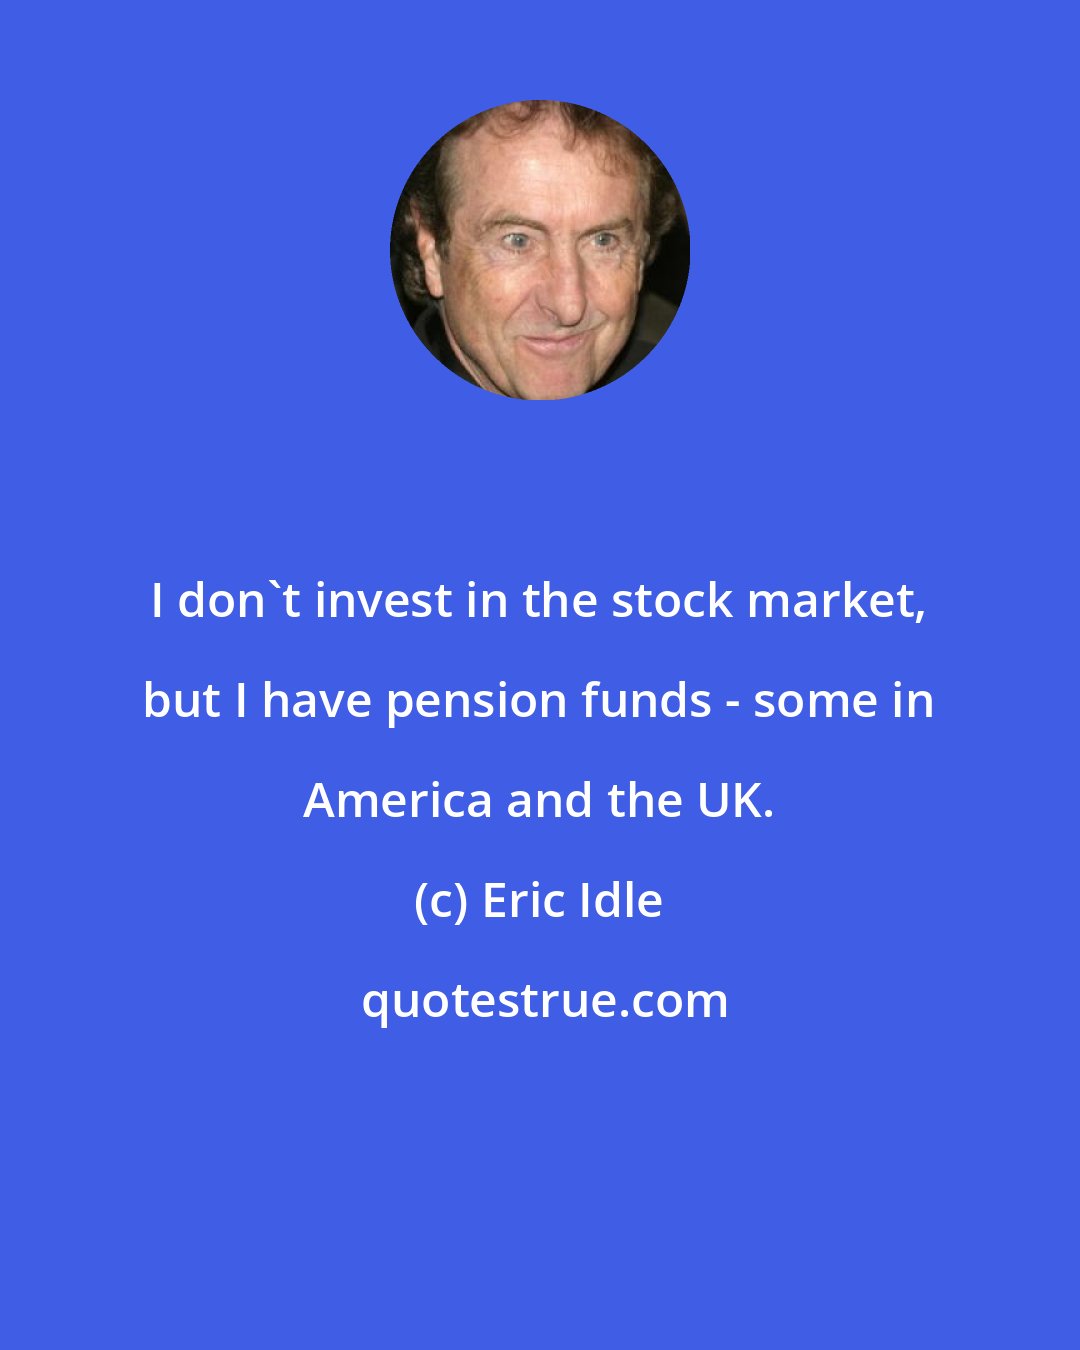 Eric Idle: I don't invest in the stock market, but I have pension funds - some in America and the UK.